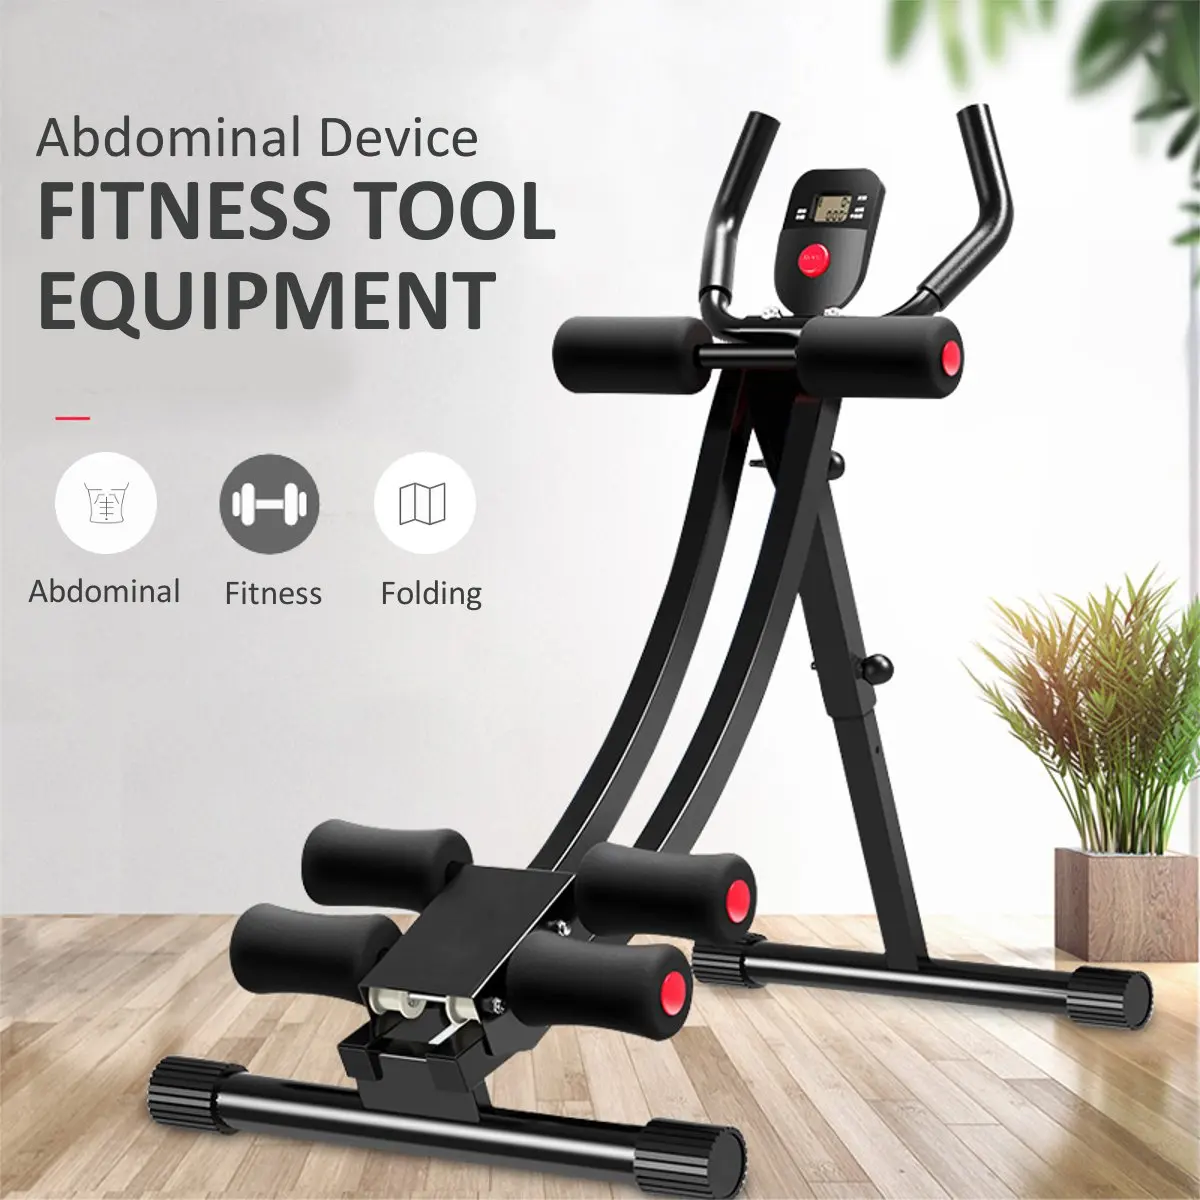 Permalink to Abdominal Trainer Folding Ab Rollers Fitness Tool Adjustable Muscle Training Device Home Gym Exercises Fitness Equipment